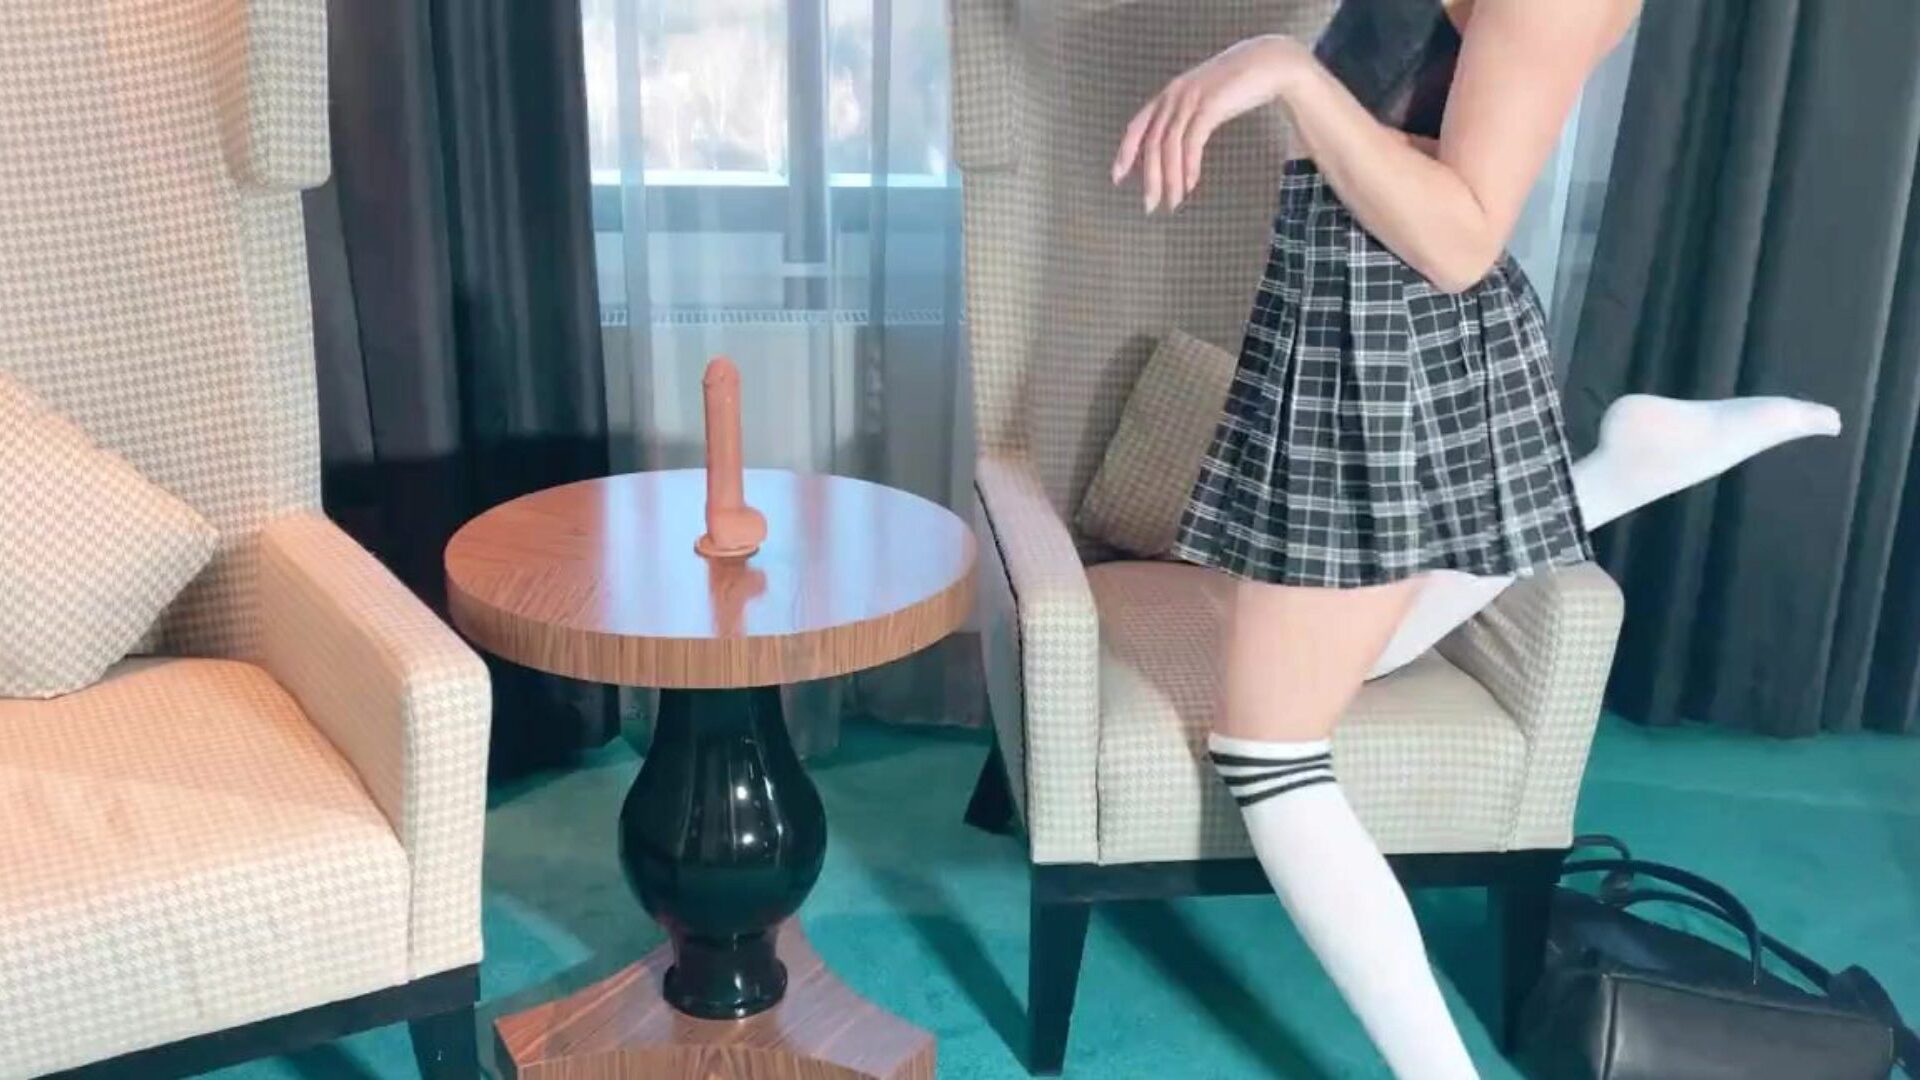 Hot Student in Skirt Loves Jumping on Dildo after Lessons